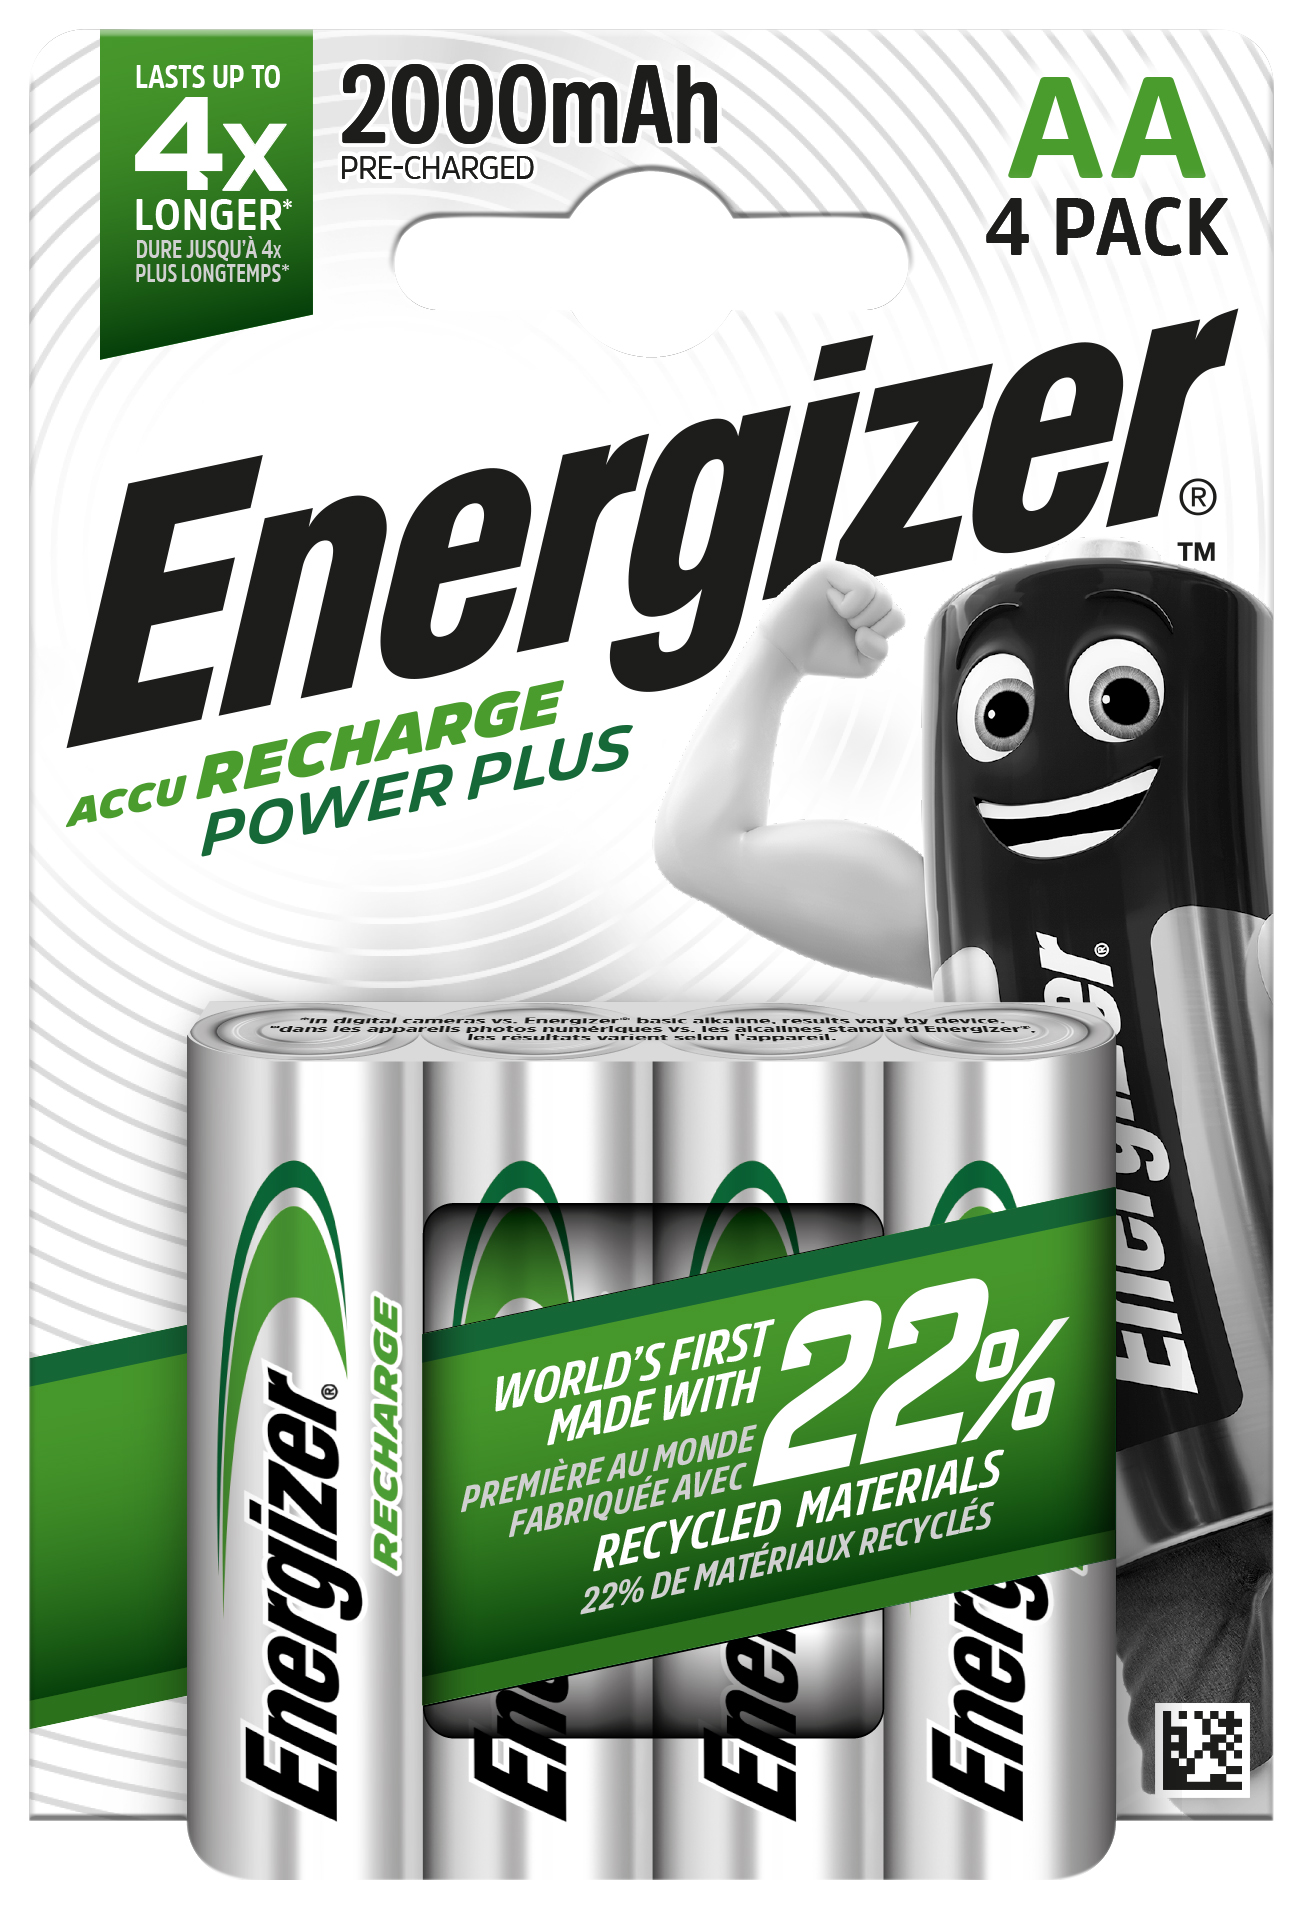 Energizer Power Plus BP4 AA Rechargeable Batteries - Pack of 4